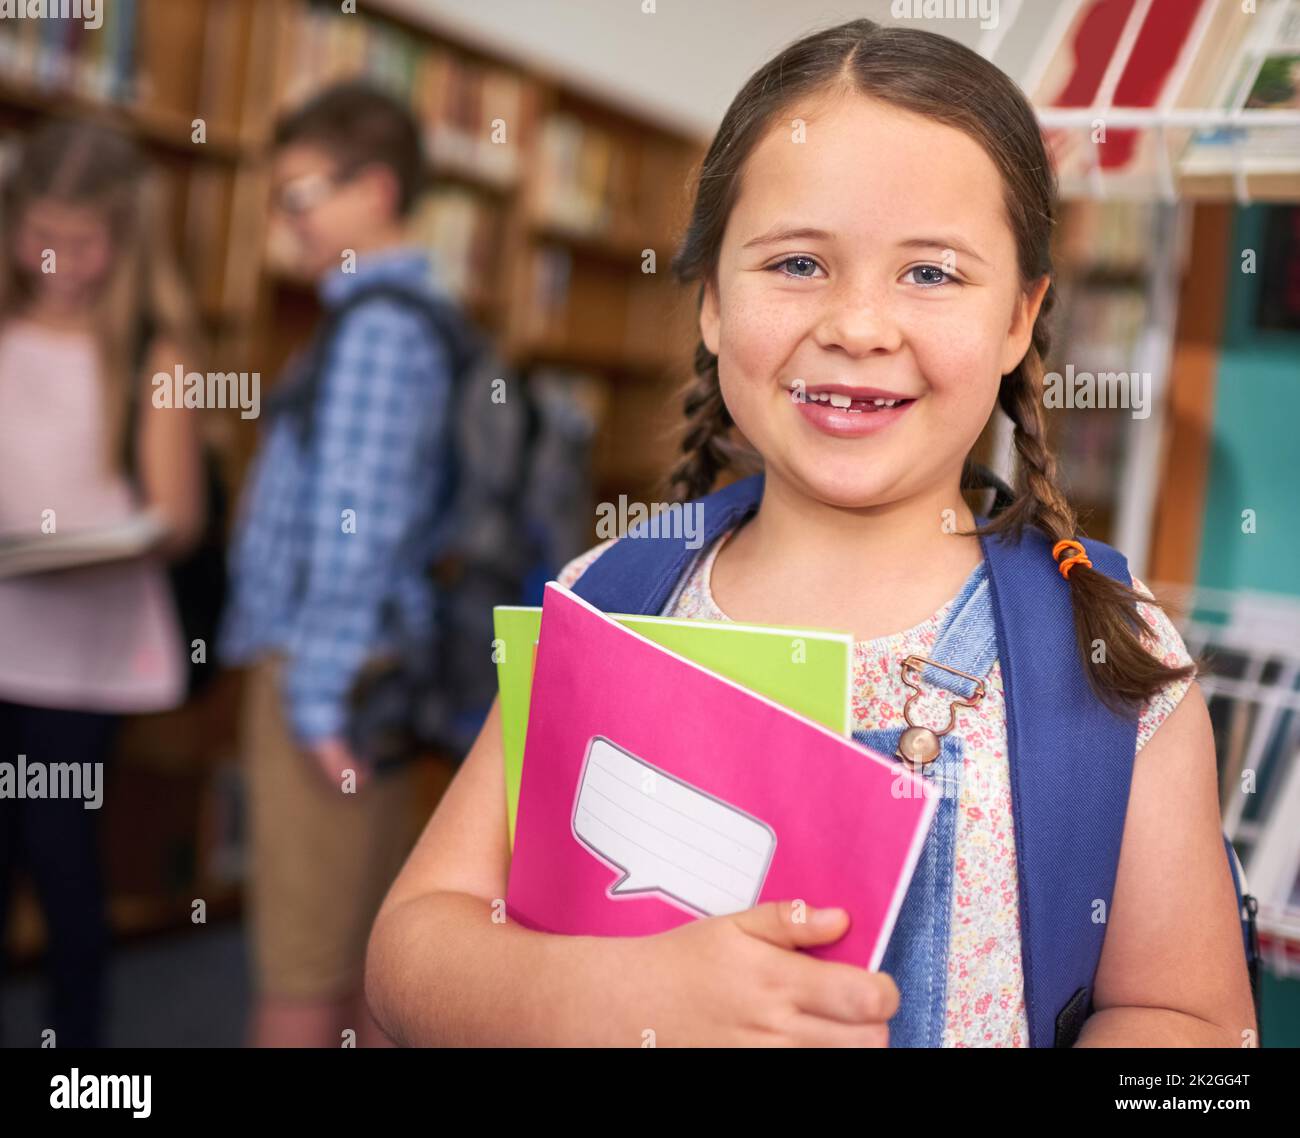 Im gonna be top of my class. Portrait of a young girl at school. Stock Photo